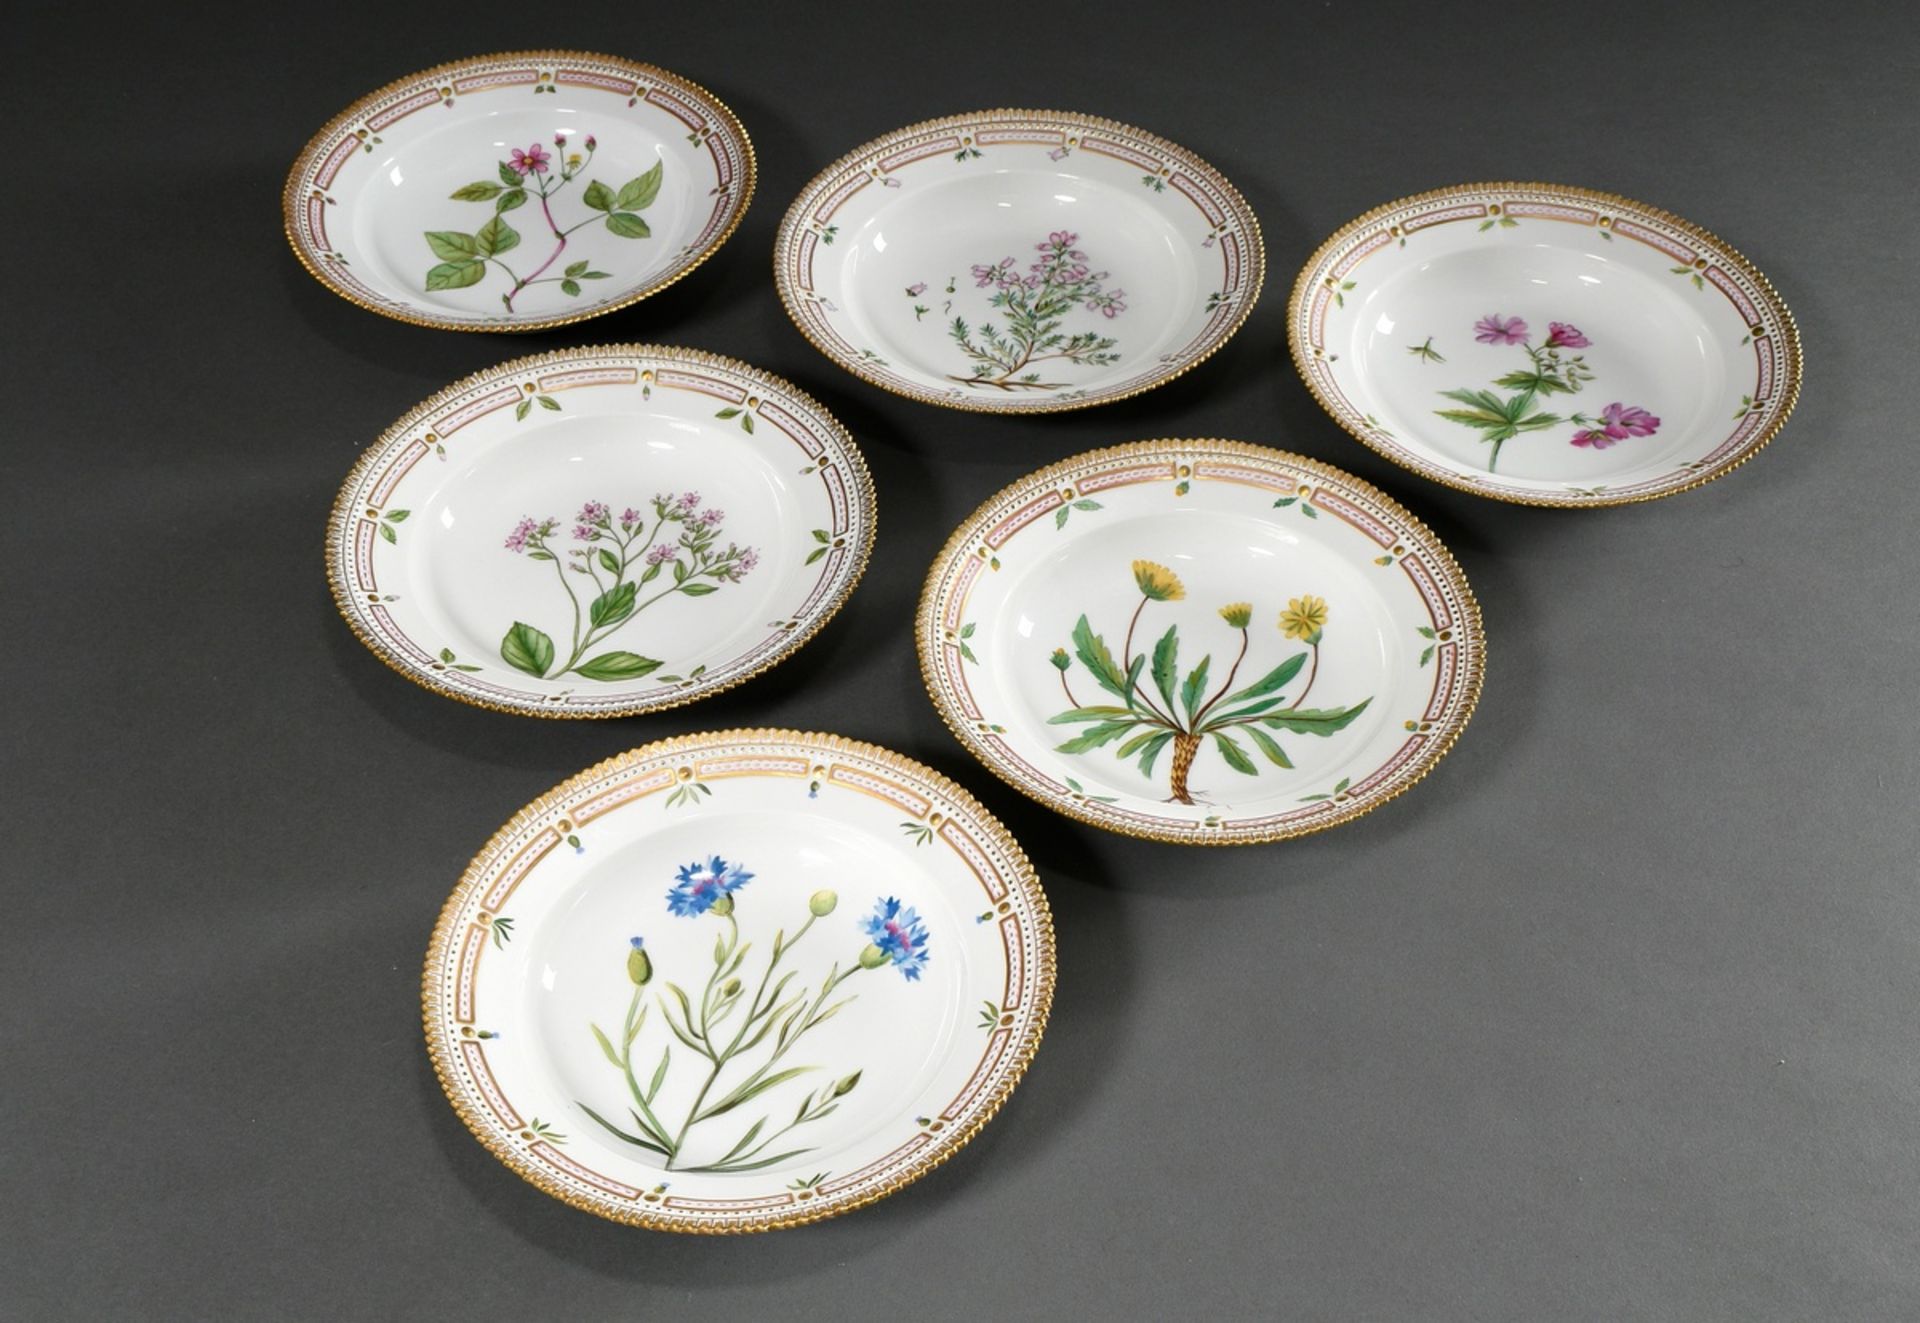 6 deep Royal Copenhagen "Flora Danica" plates with polychrome painting in the mirror and gold decor - Image 2 of 15